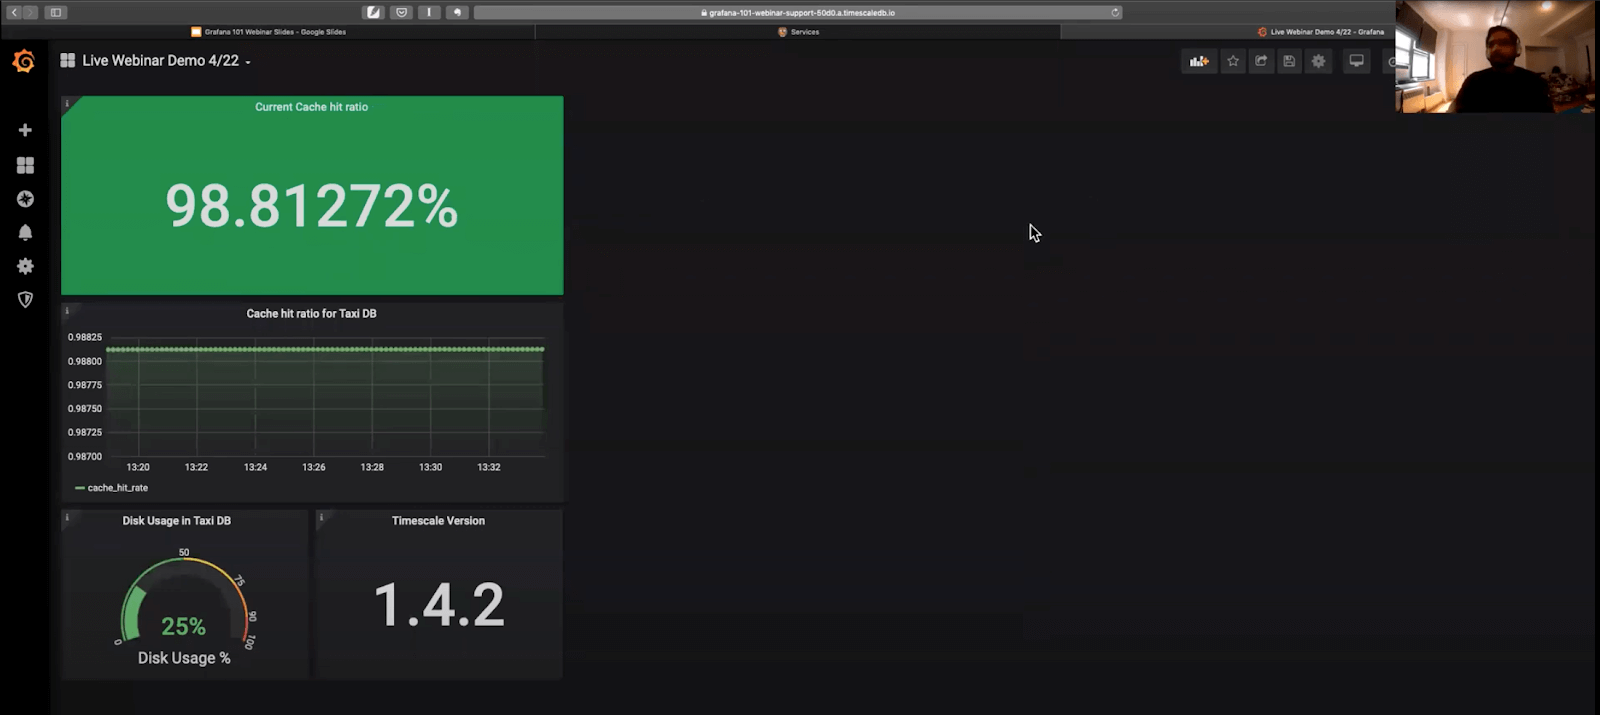 Grafana dashboard showing various visuals created from DevOps data